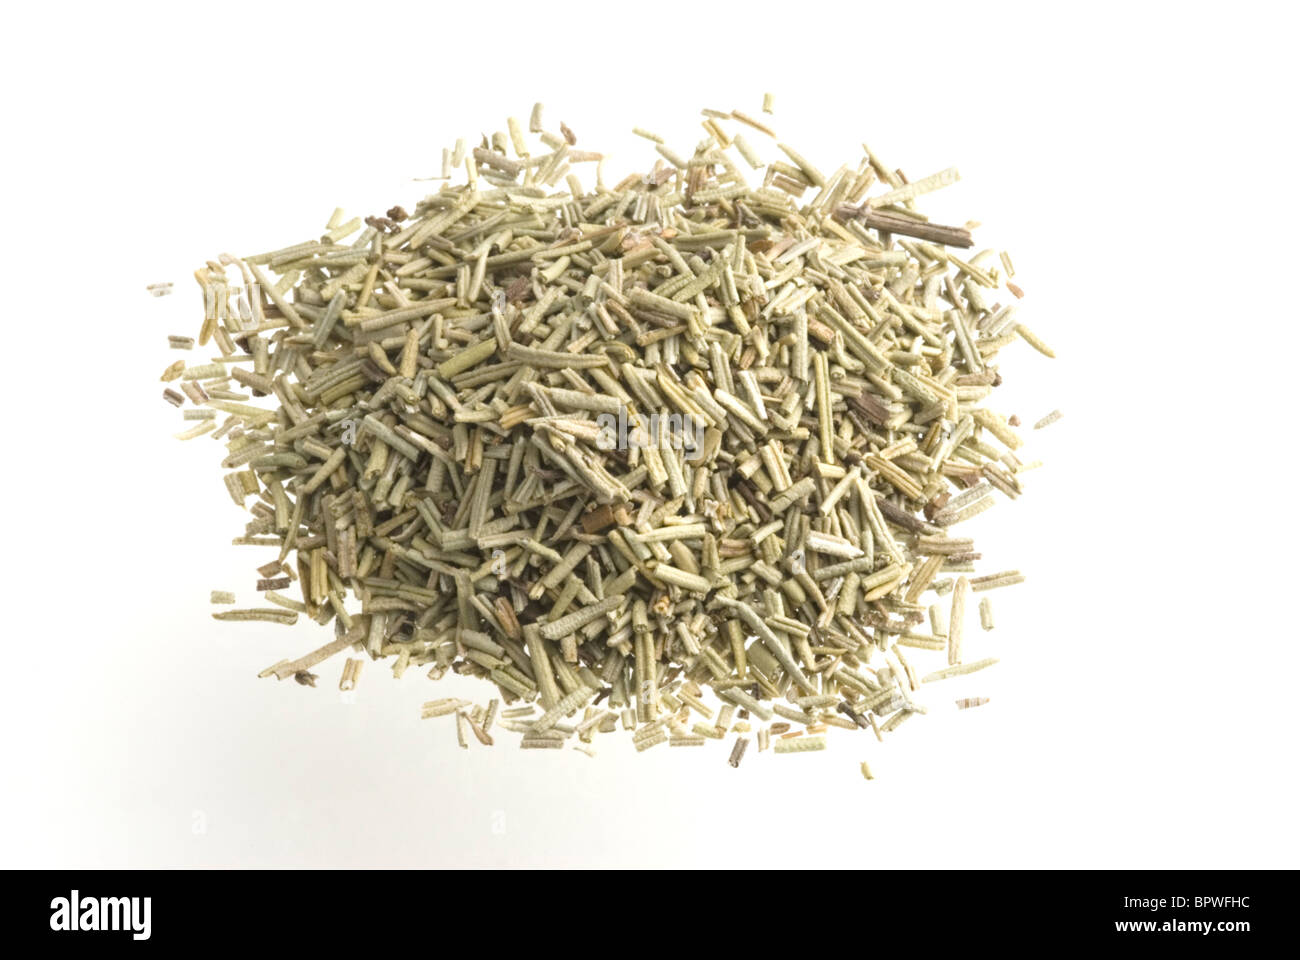 A pile of the herb Rosemary, on a white background. Stock Photo